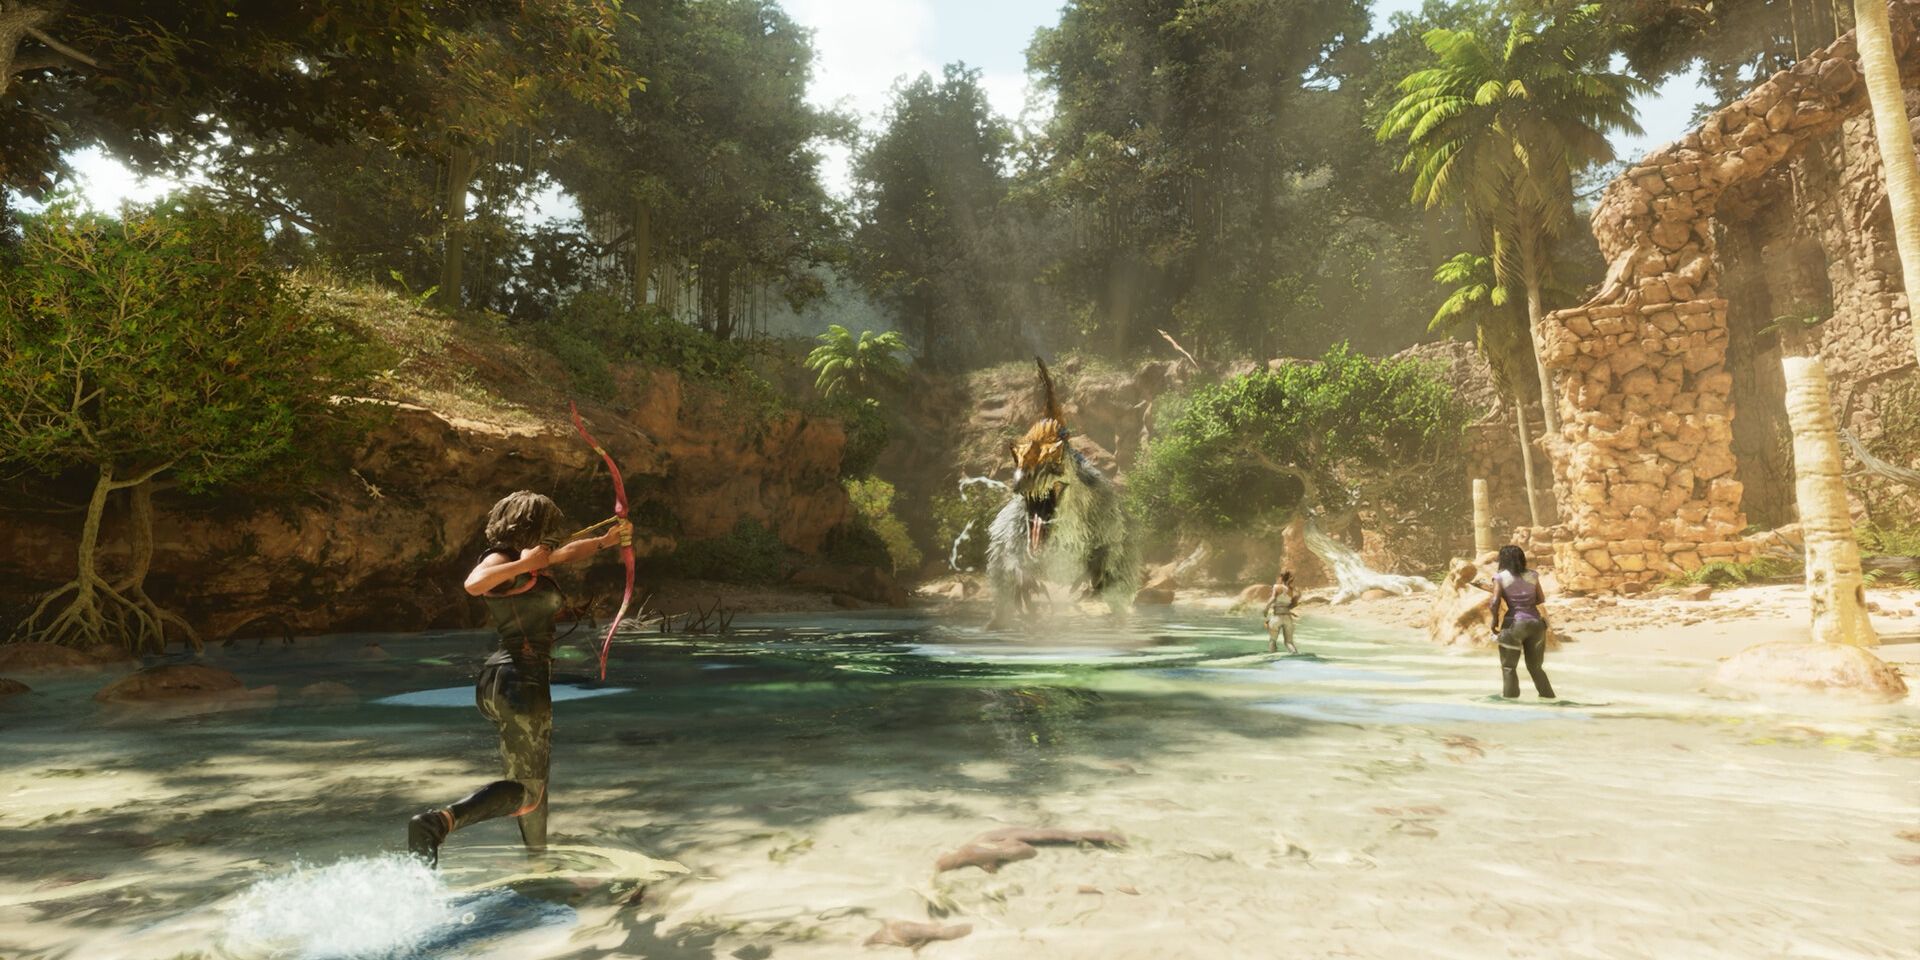 Three player character rush toward a raging dinosaur in a small, dusty clearing in a screenshot from Ark: Survival Ascended.